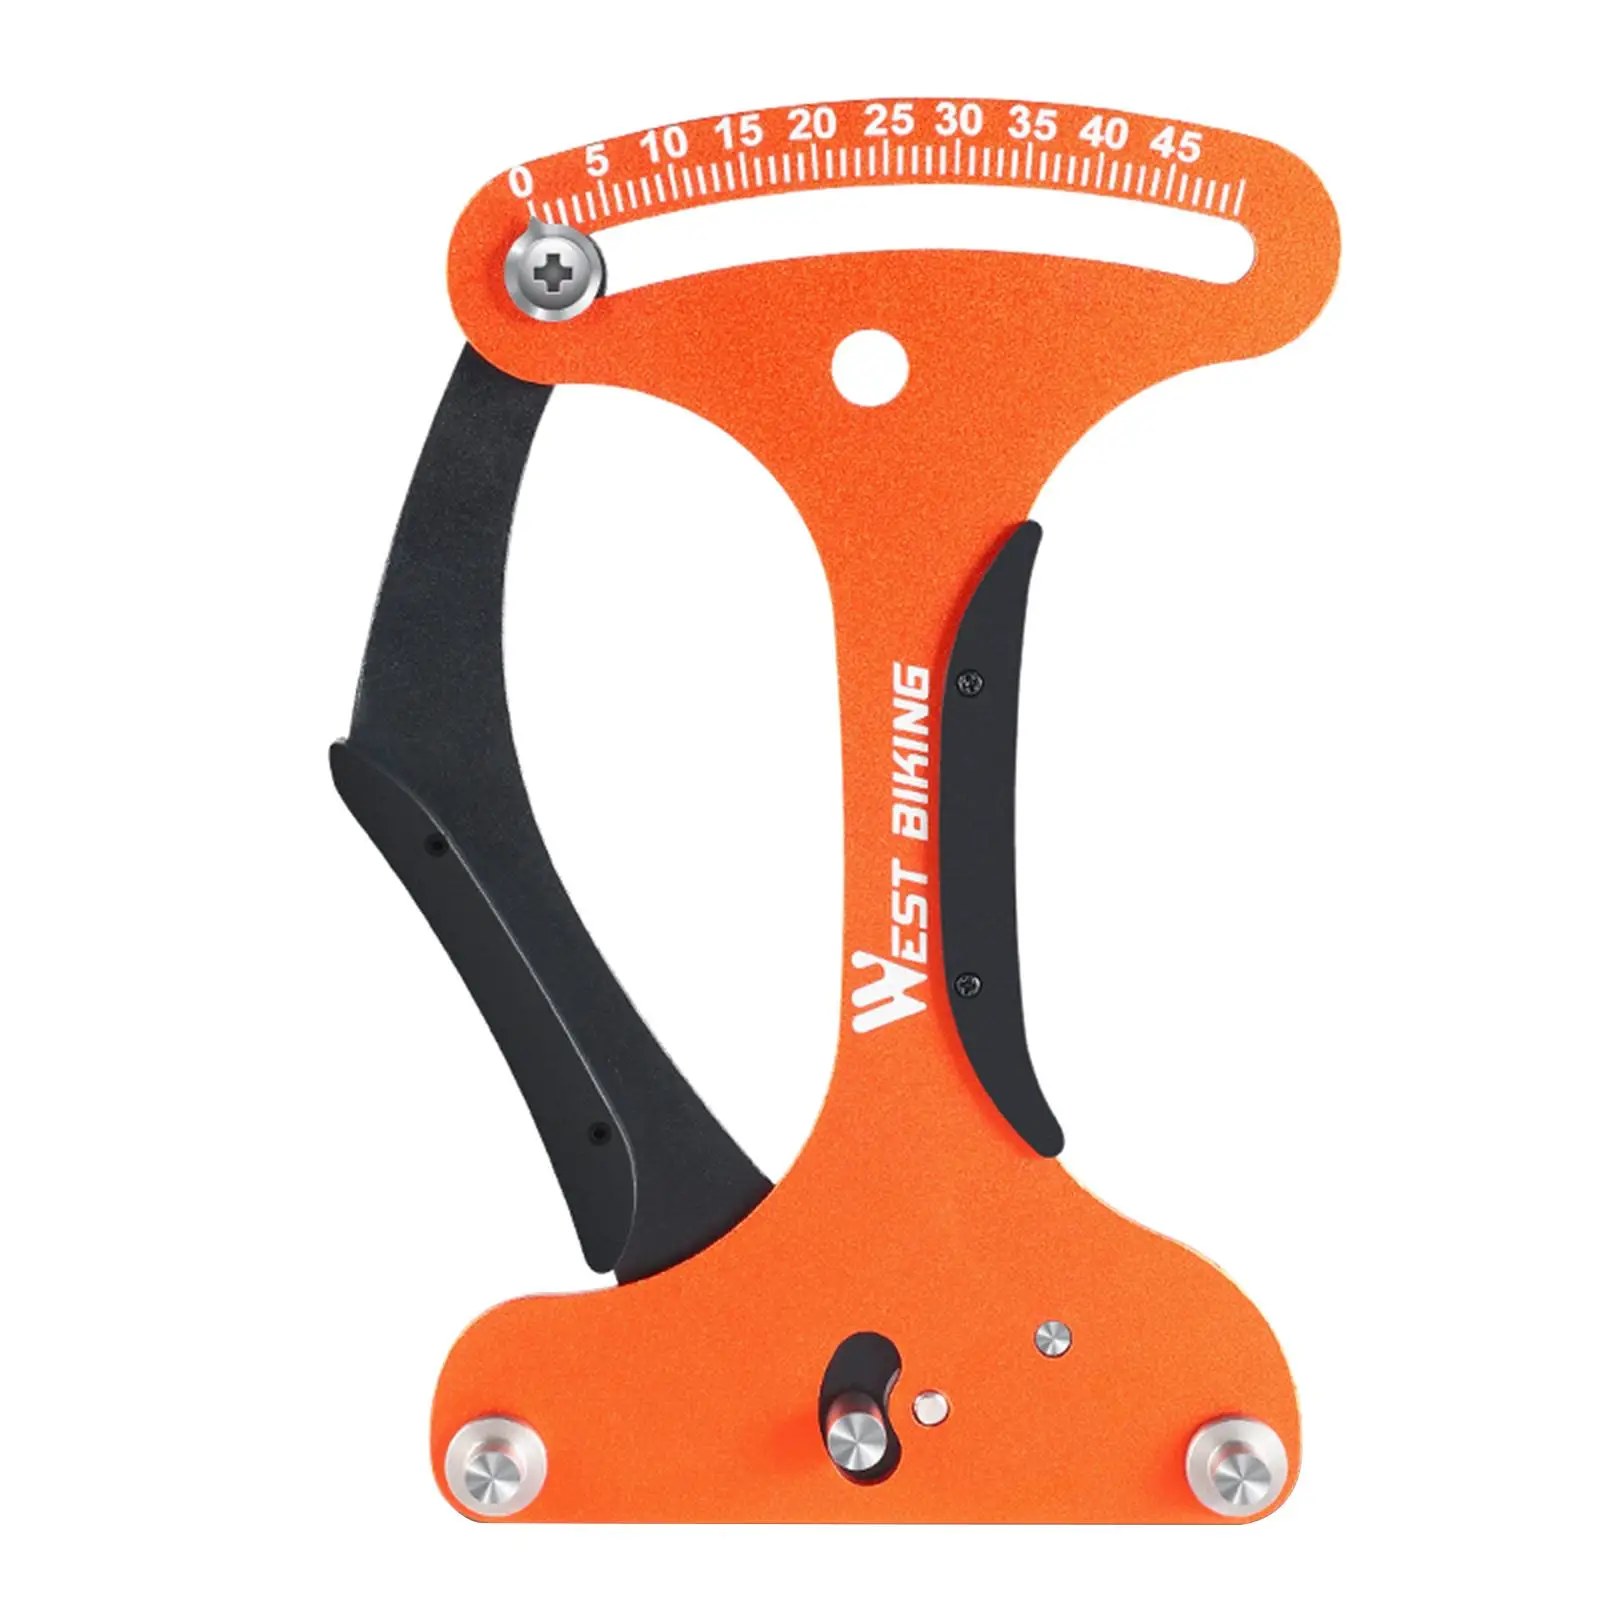 Bike Bicycle Tension Meter Spokes Tool Aluminum Alloy Simple to Manufacturing or Correction Adjustment Tool Portable